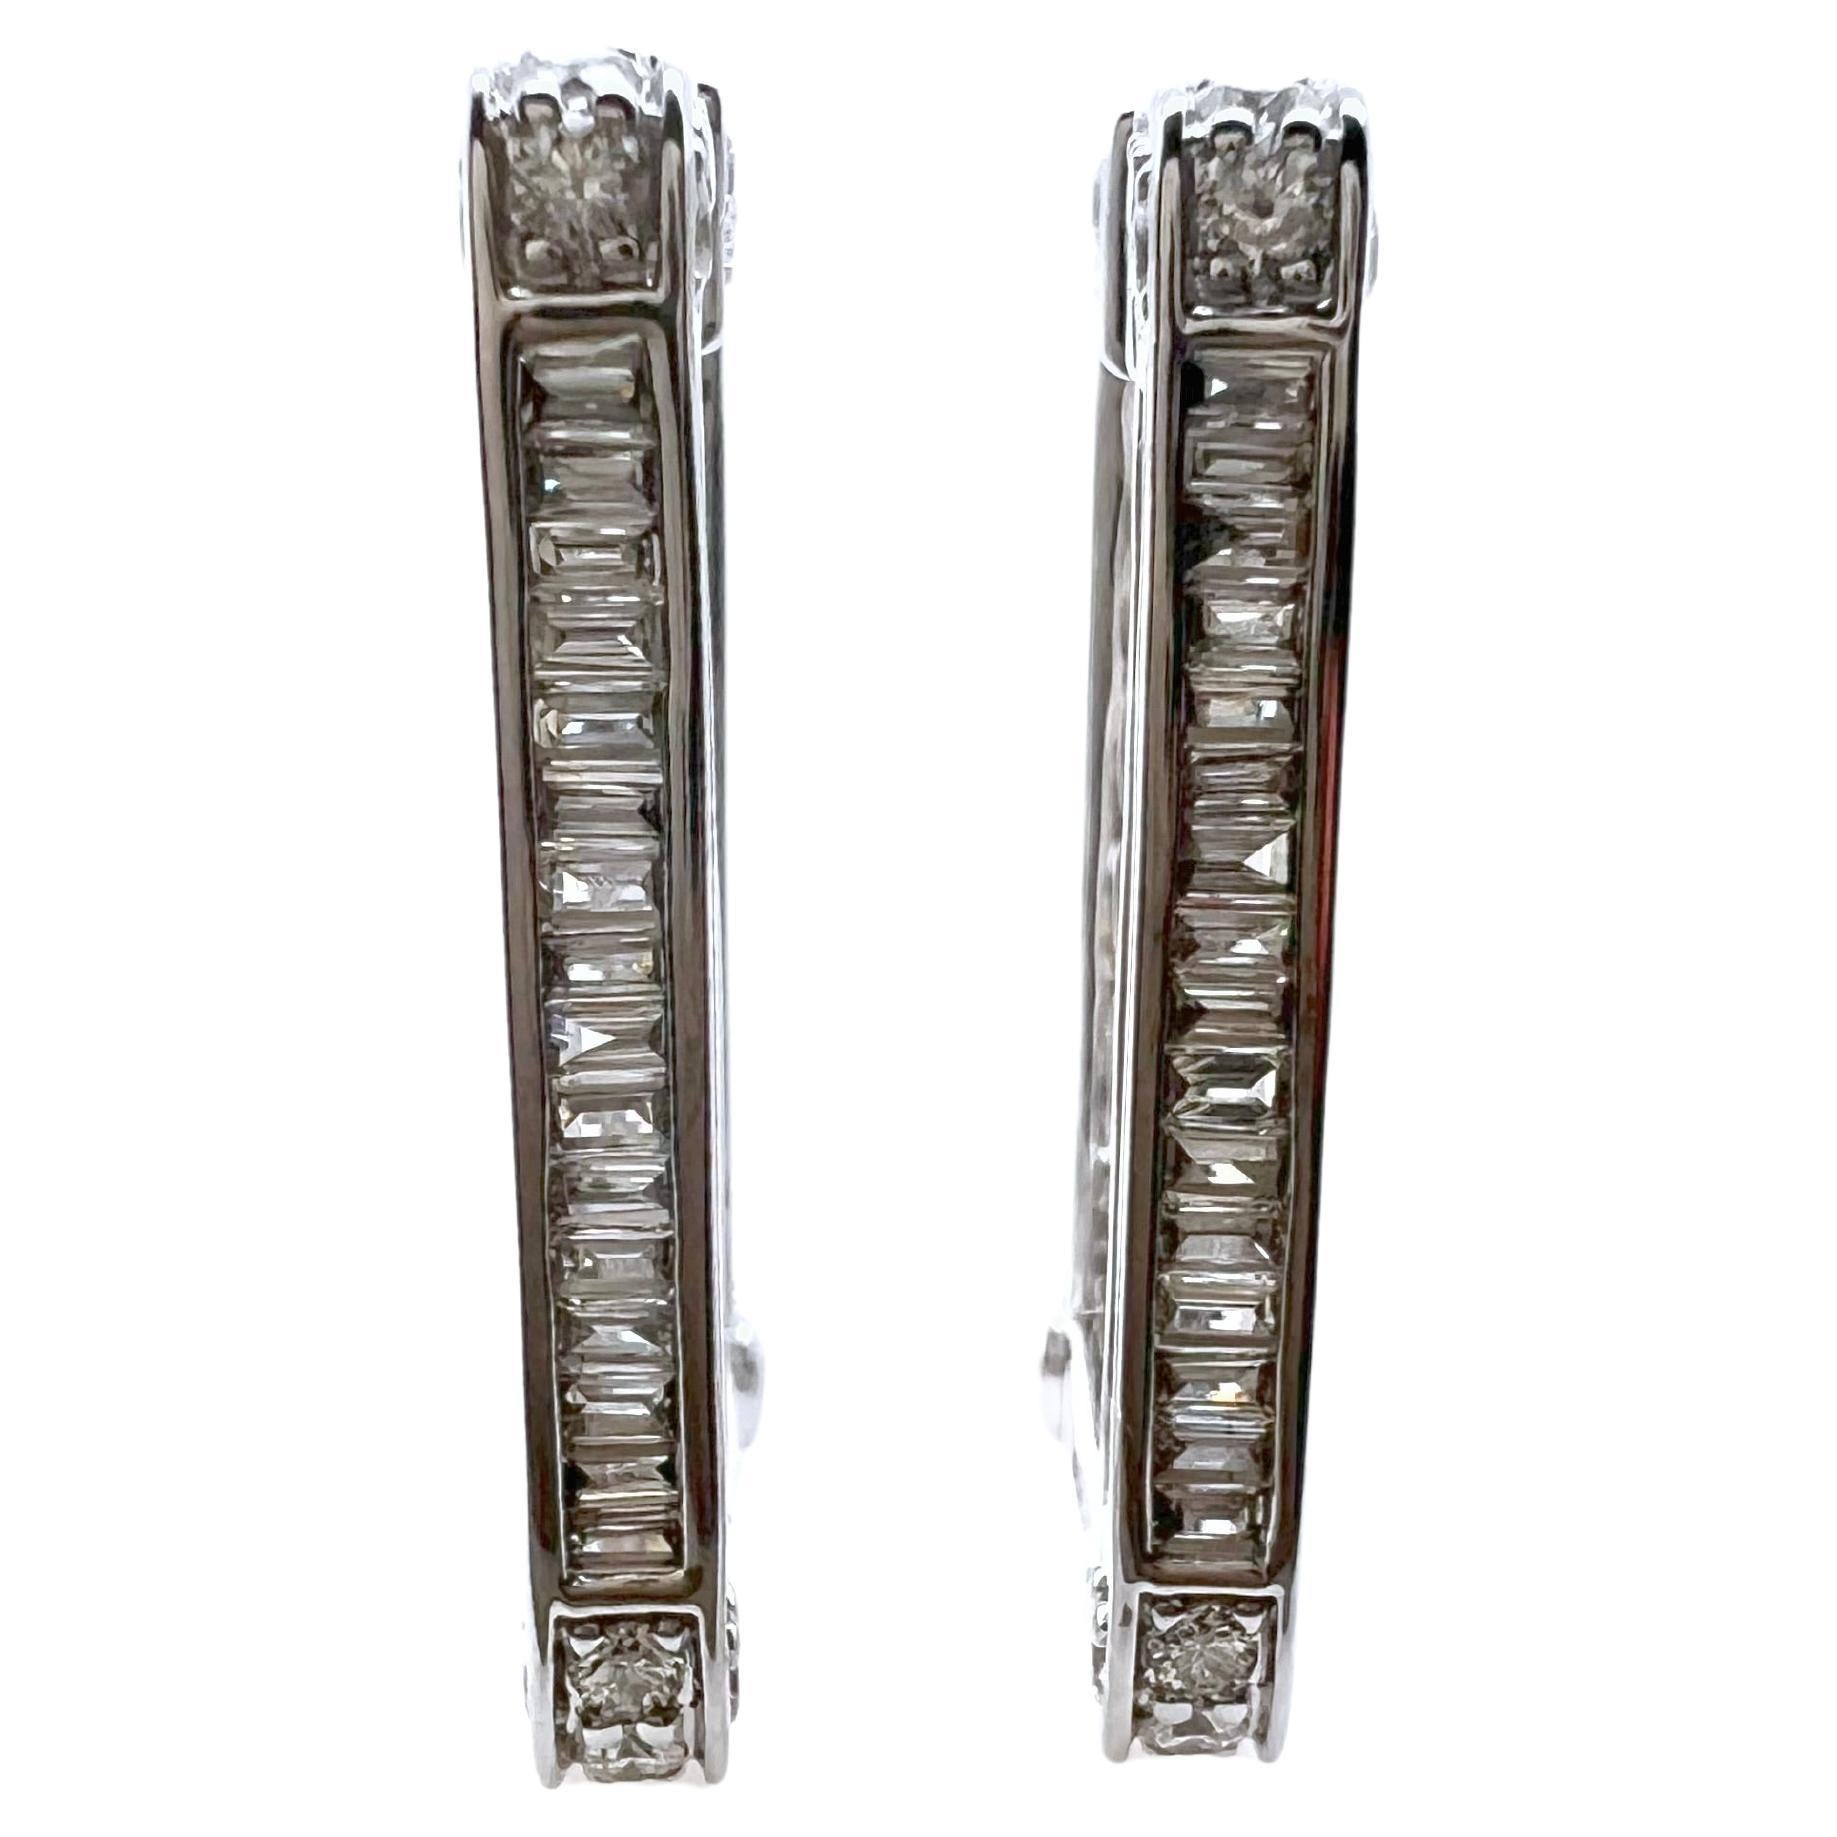 This is an amazing pair of diamond earrings.  The rectangular shape gives it a more fresh, modern look with diamonds on the inside, outside, and even on the side. Making it 3 sides of diamonds.  The baguettes are channeled set with a round brilliant